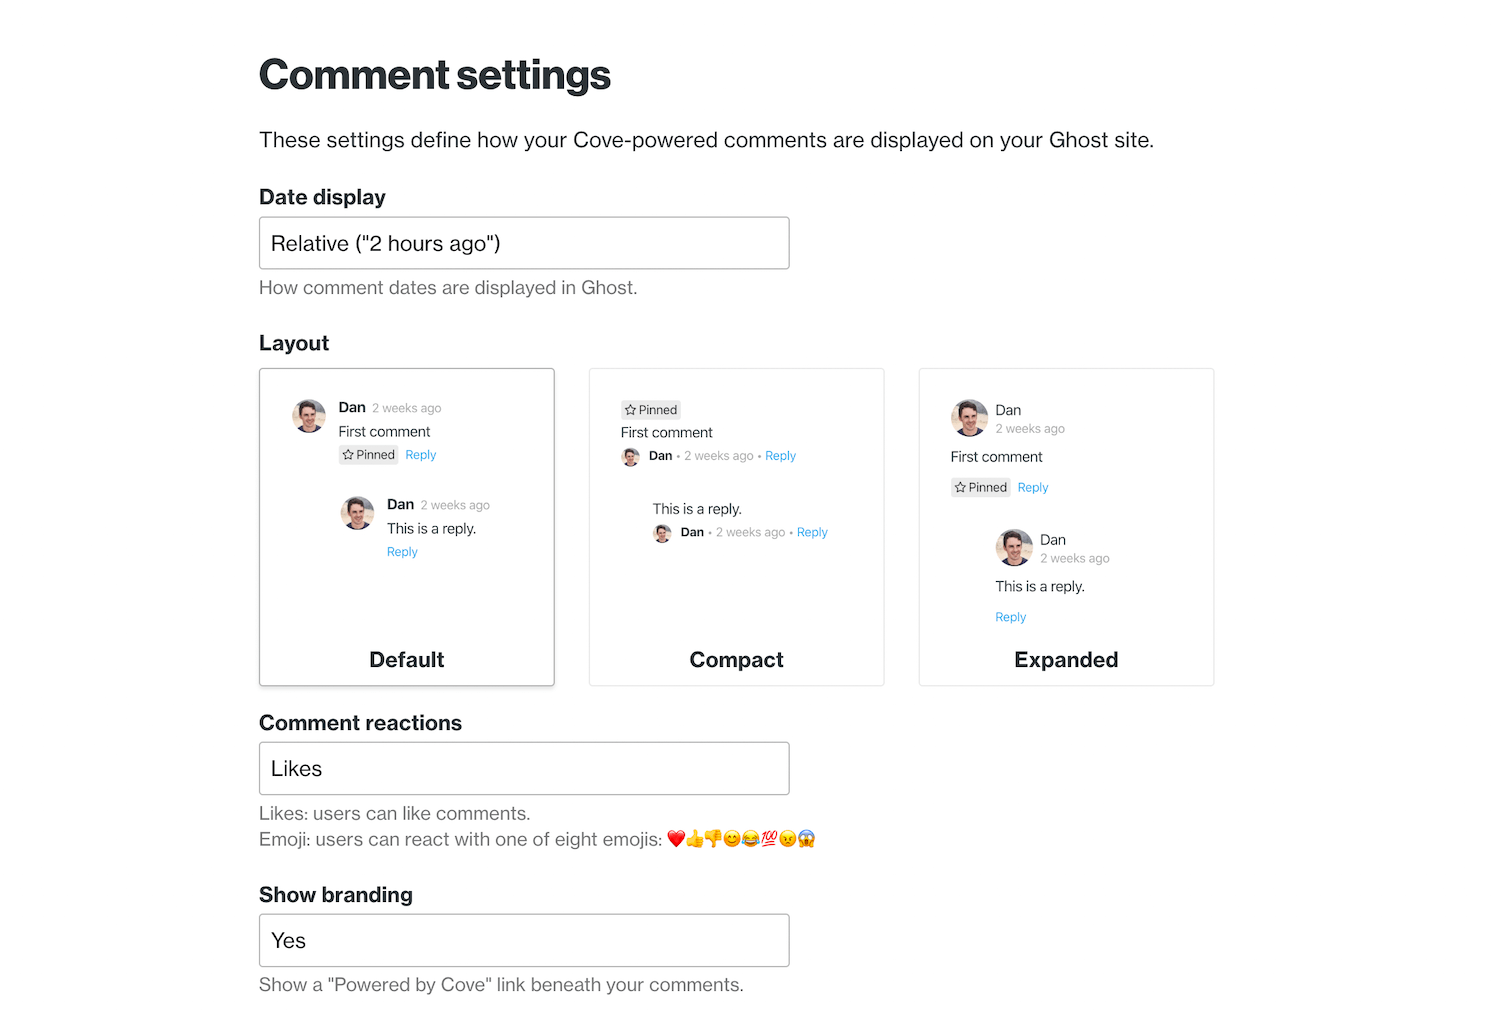 How to add comments to your Ghost site